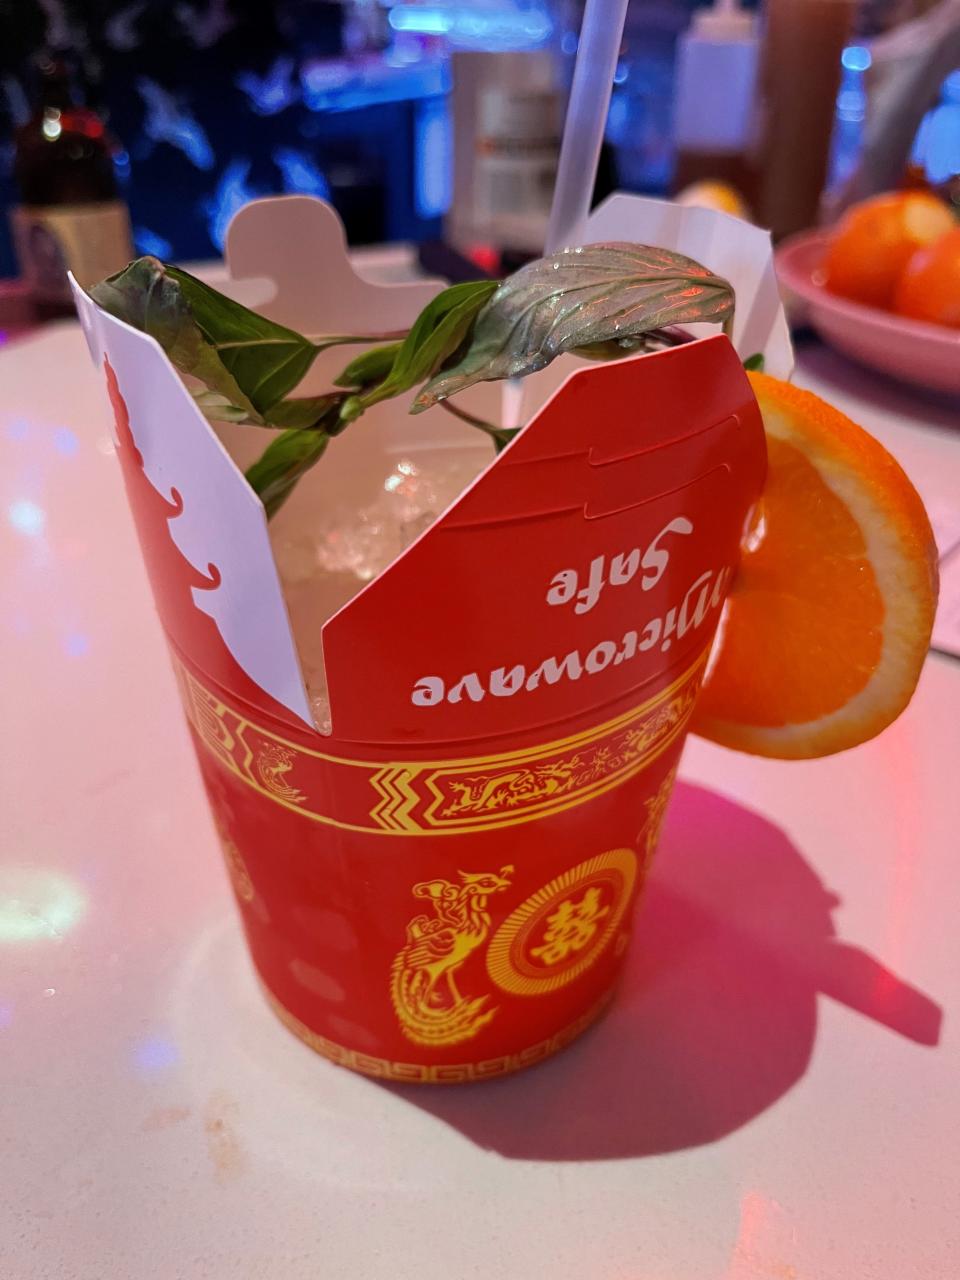 The Mai Thai at Cham Pang Lanes is made with rum, Curaçao, Orgeat and lime. It's served inside a food takeout container.